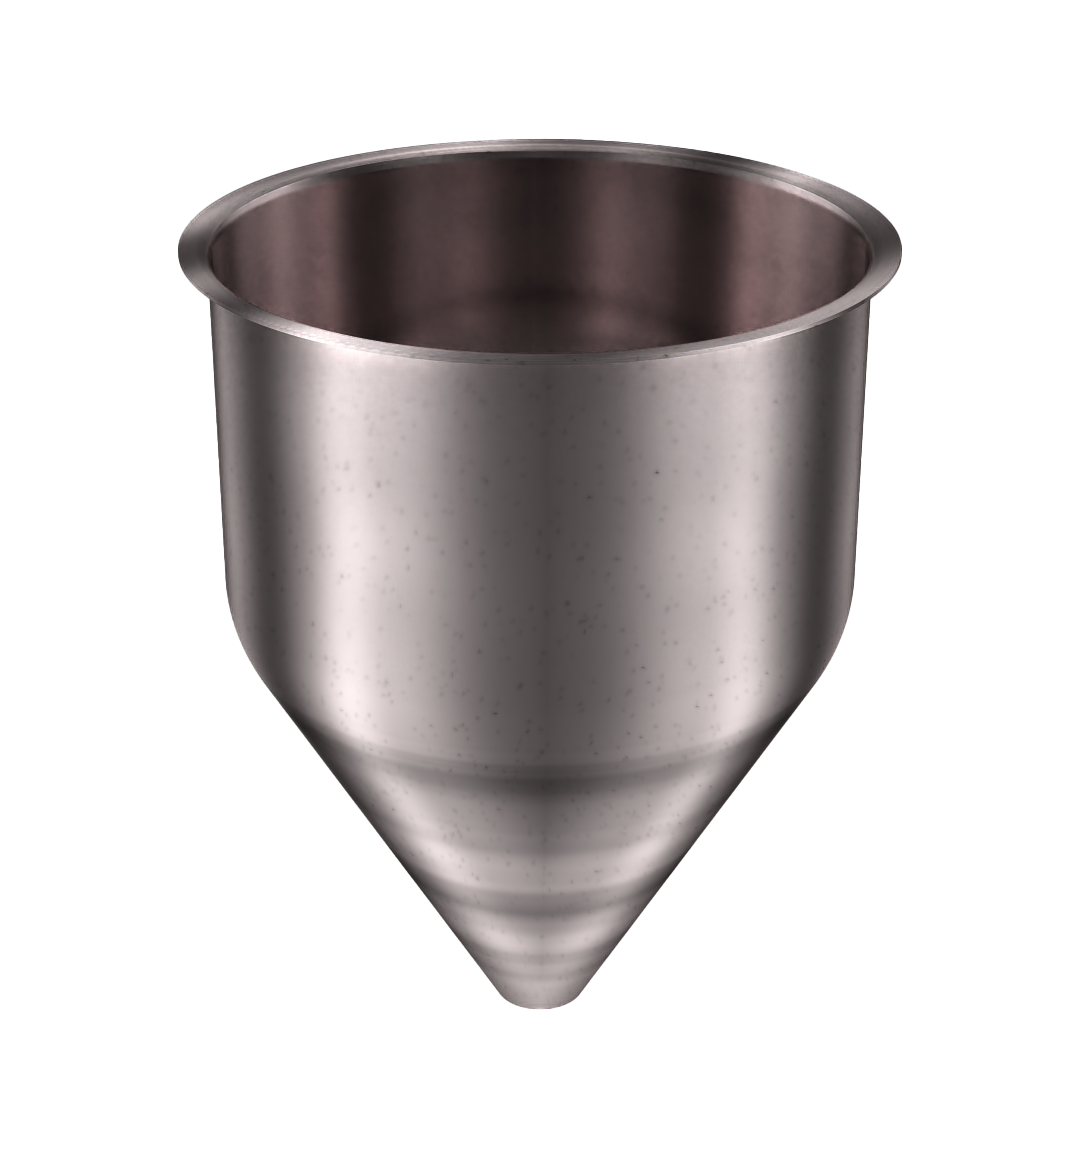 304 Stainless Steel Funnel 5.11 gallons, 11.85" ID x 16.13" OAH